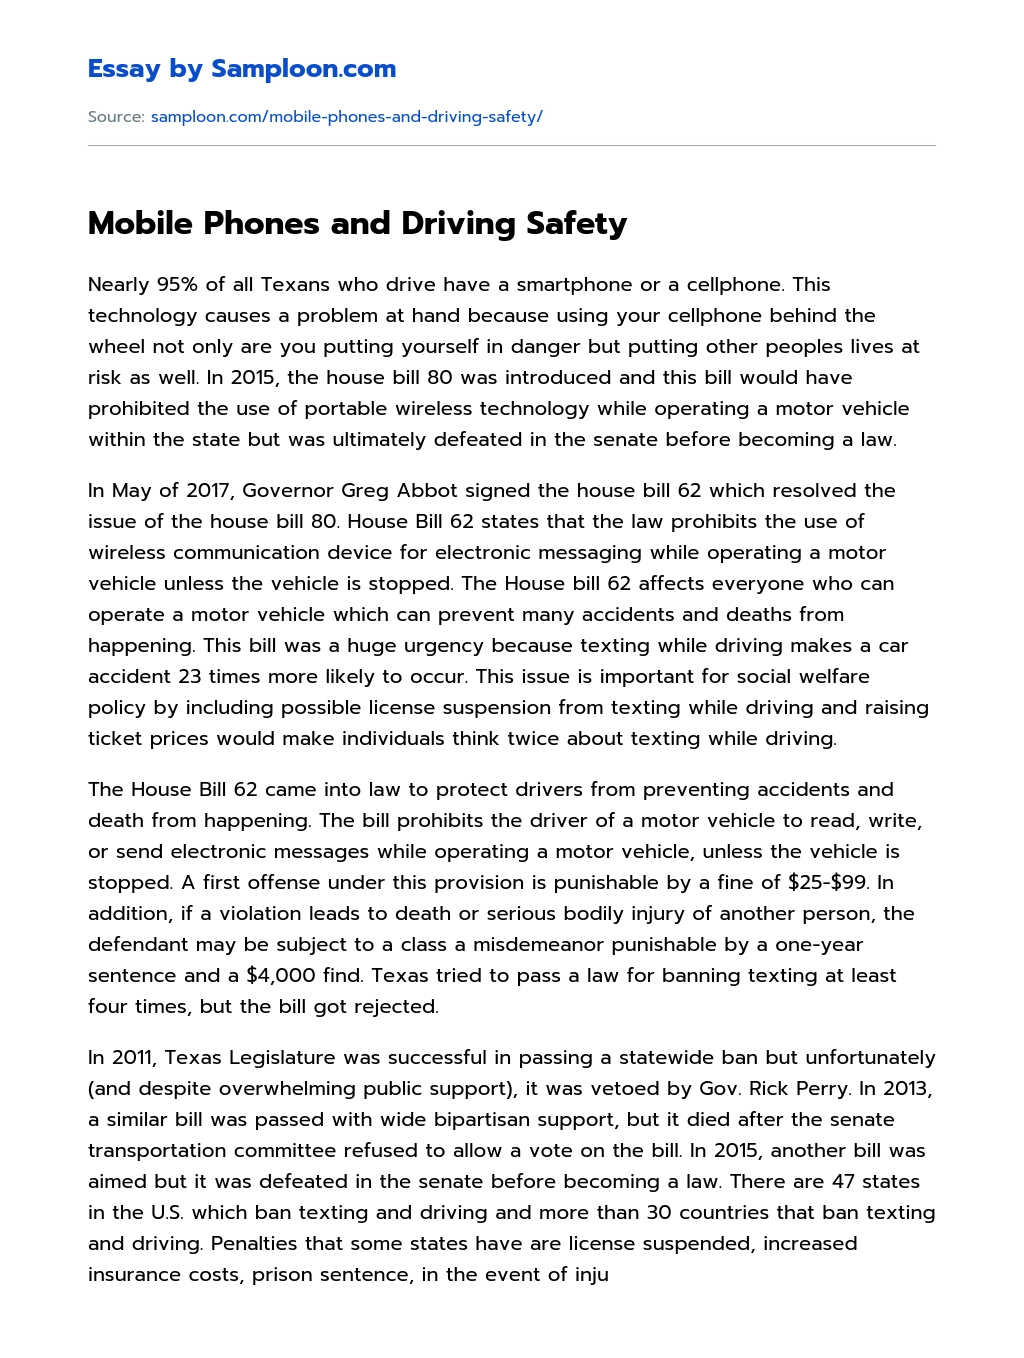 Mobile Phones and Driving Safety essay